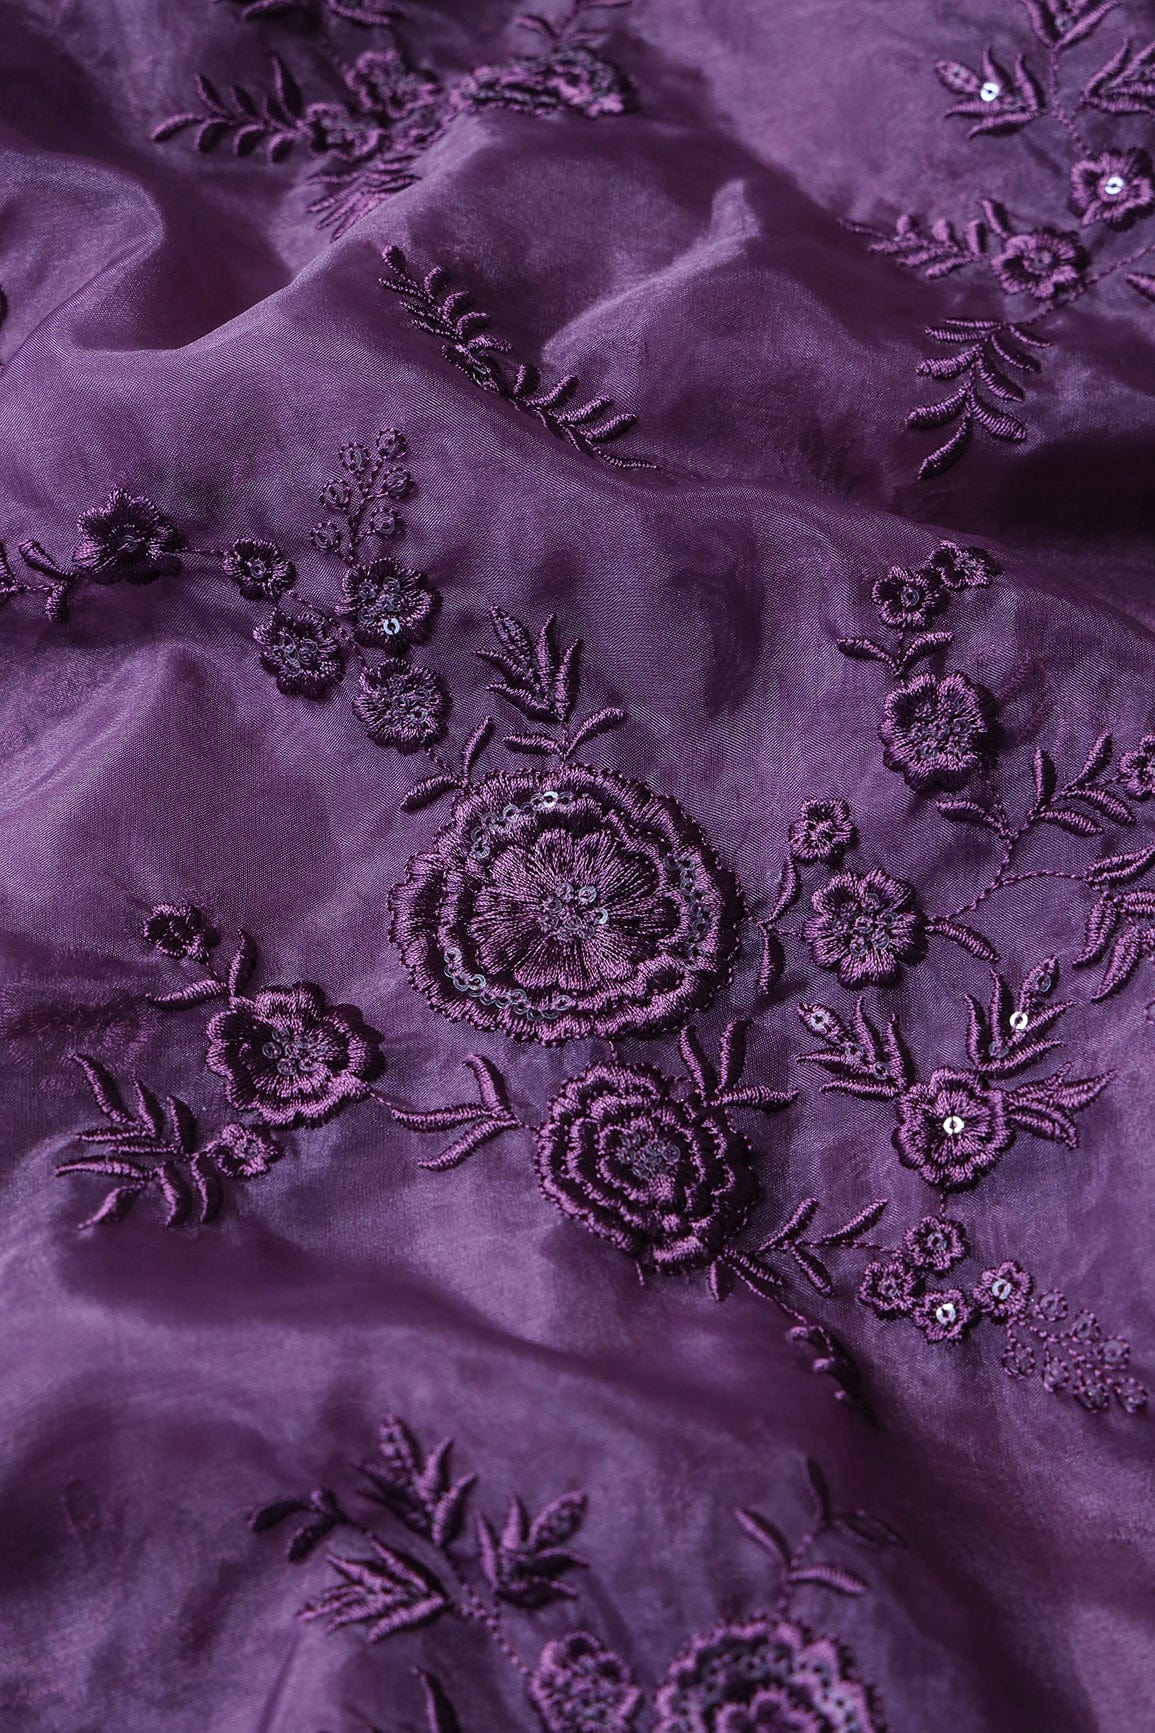 doeraa Embroidery Fabrics Purple Thread With Water Sequins Floral Embroidery Work On Purple Organza Fabric